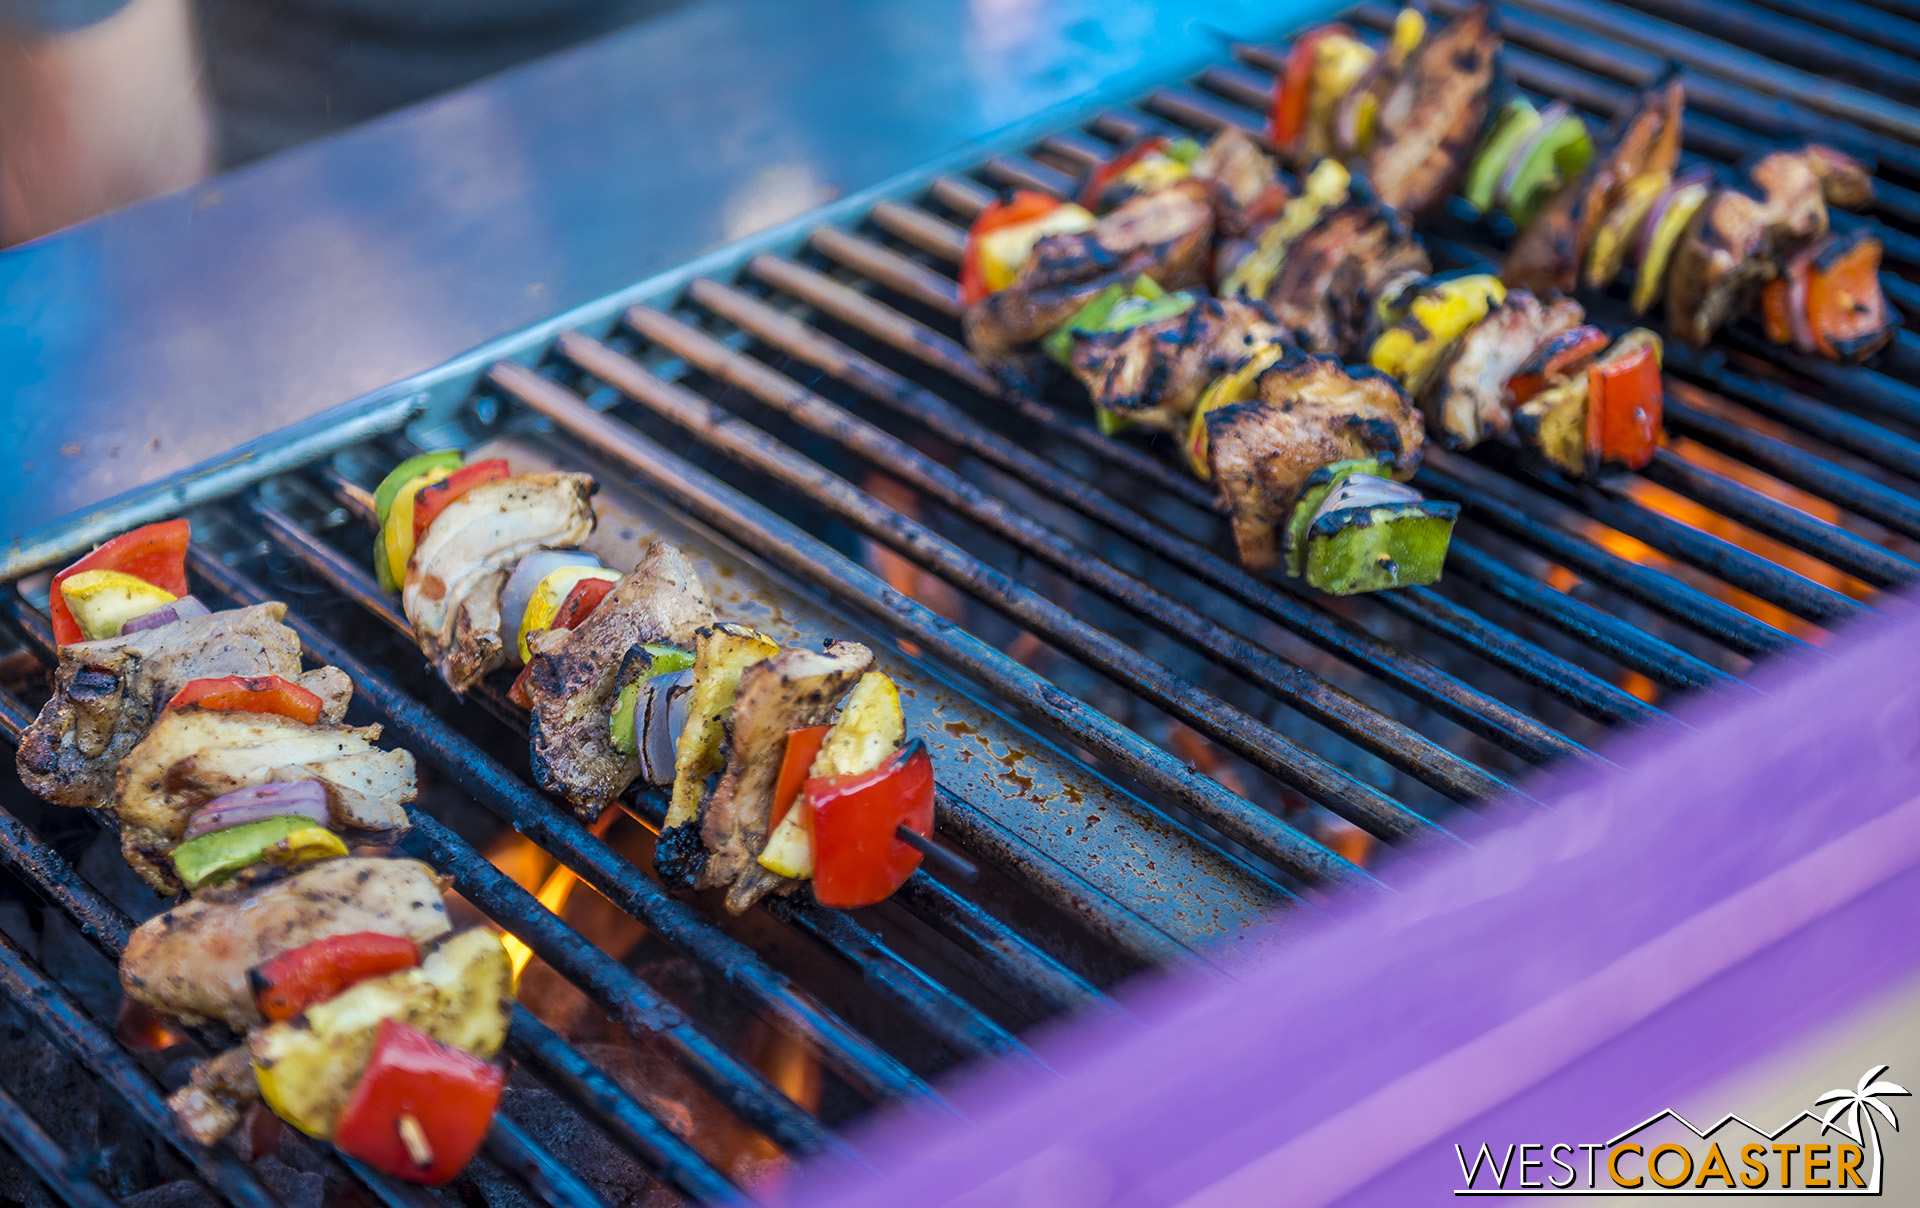  The skewers were pretty awesome. 